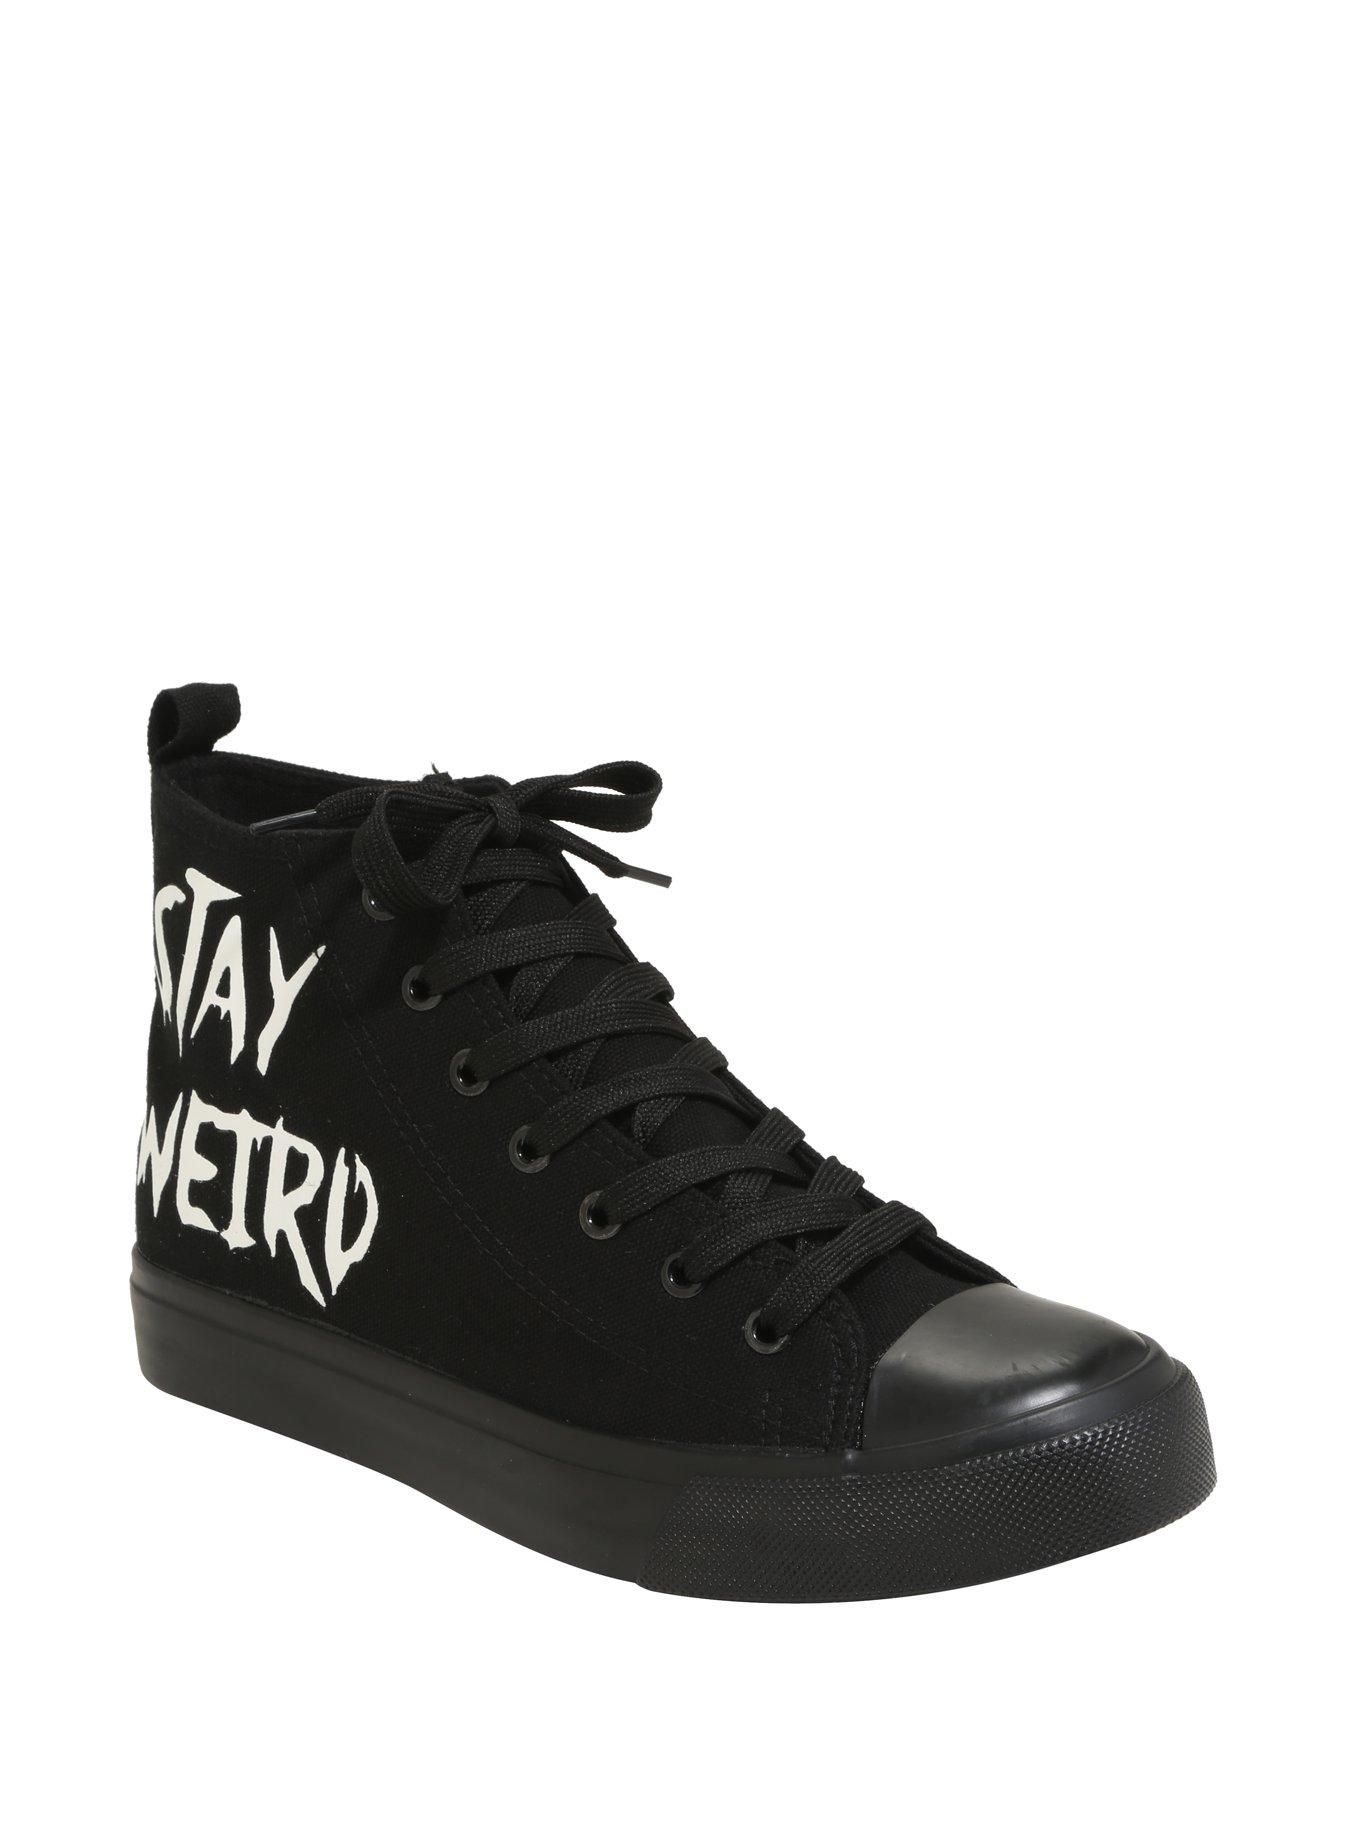 Stay Weird Hi-Top Sneakers | Hot Topic